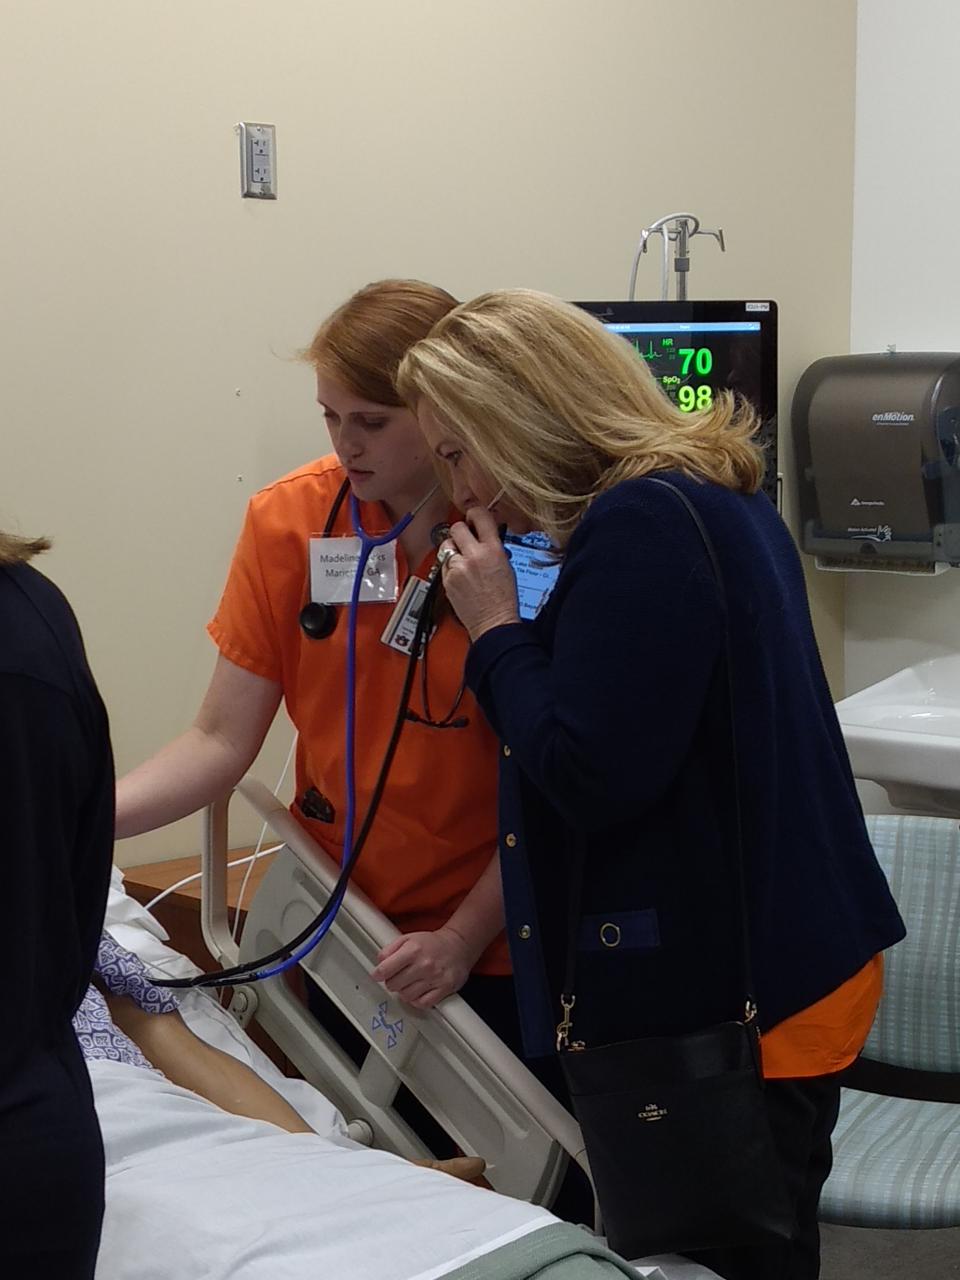 Alacare CEO, Susan Brouillette, at the Auburn University Simulation Lab being shown the \